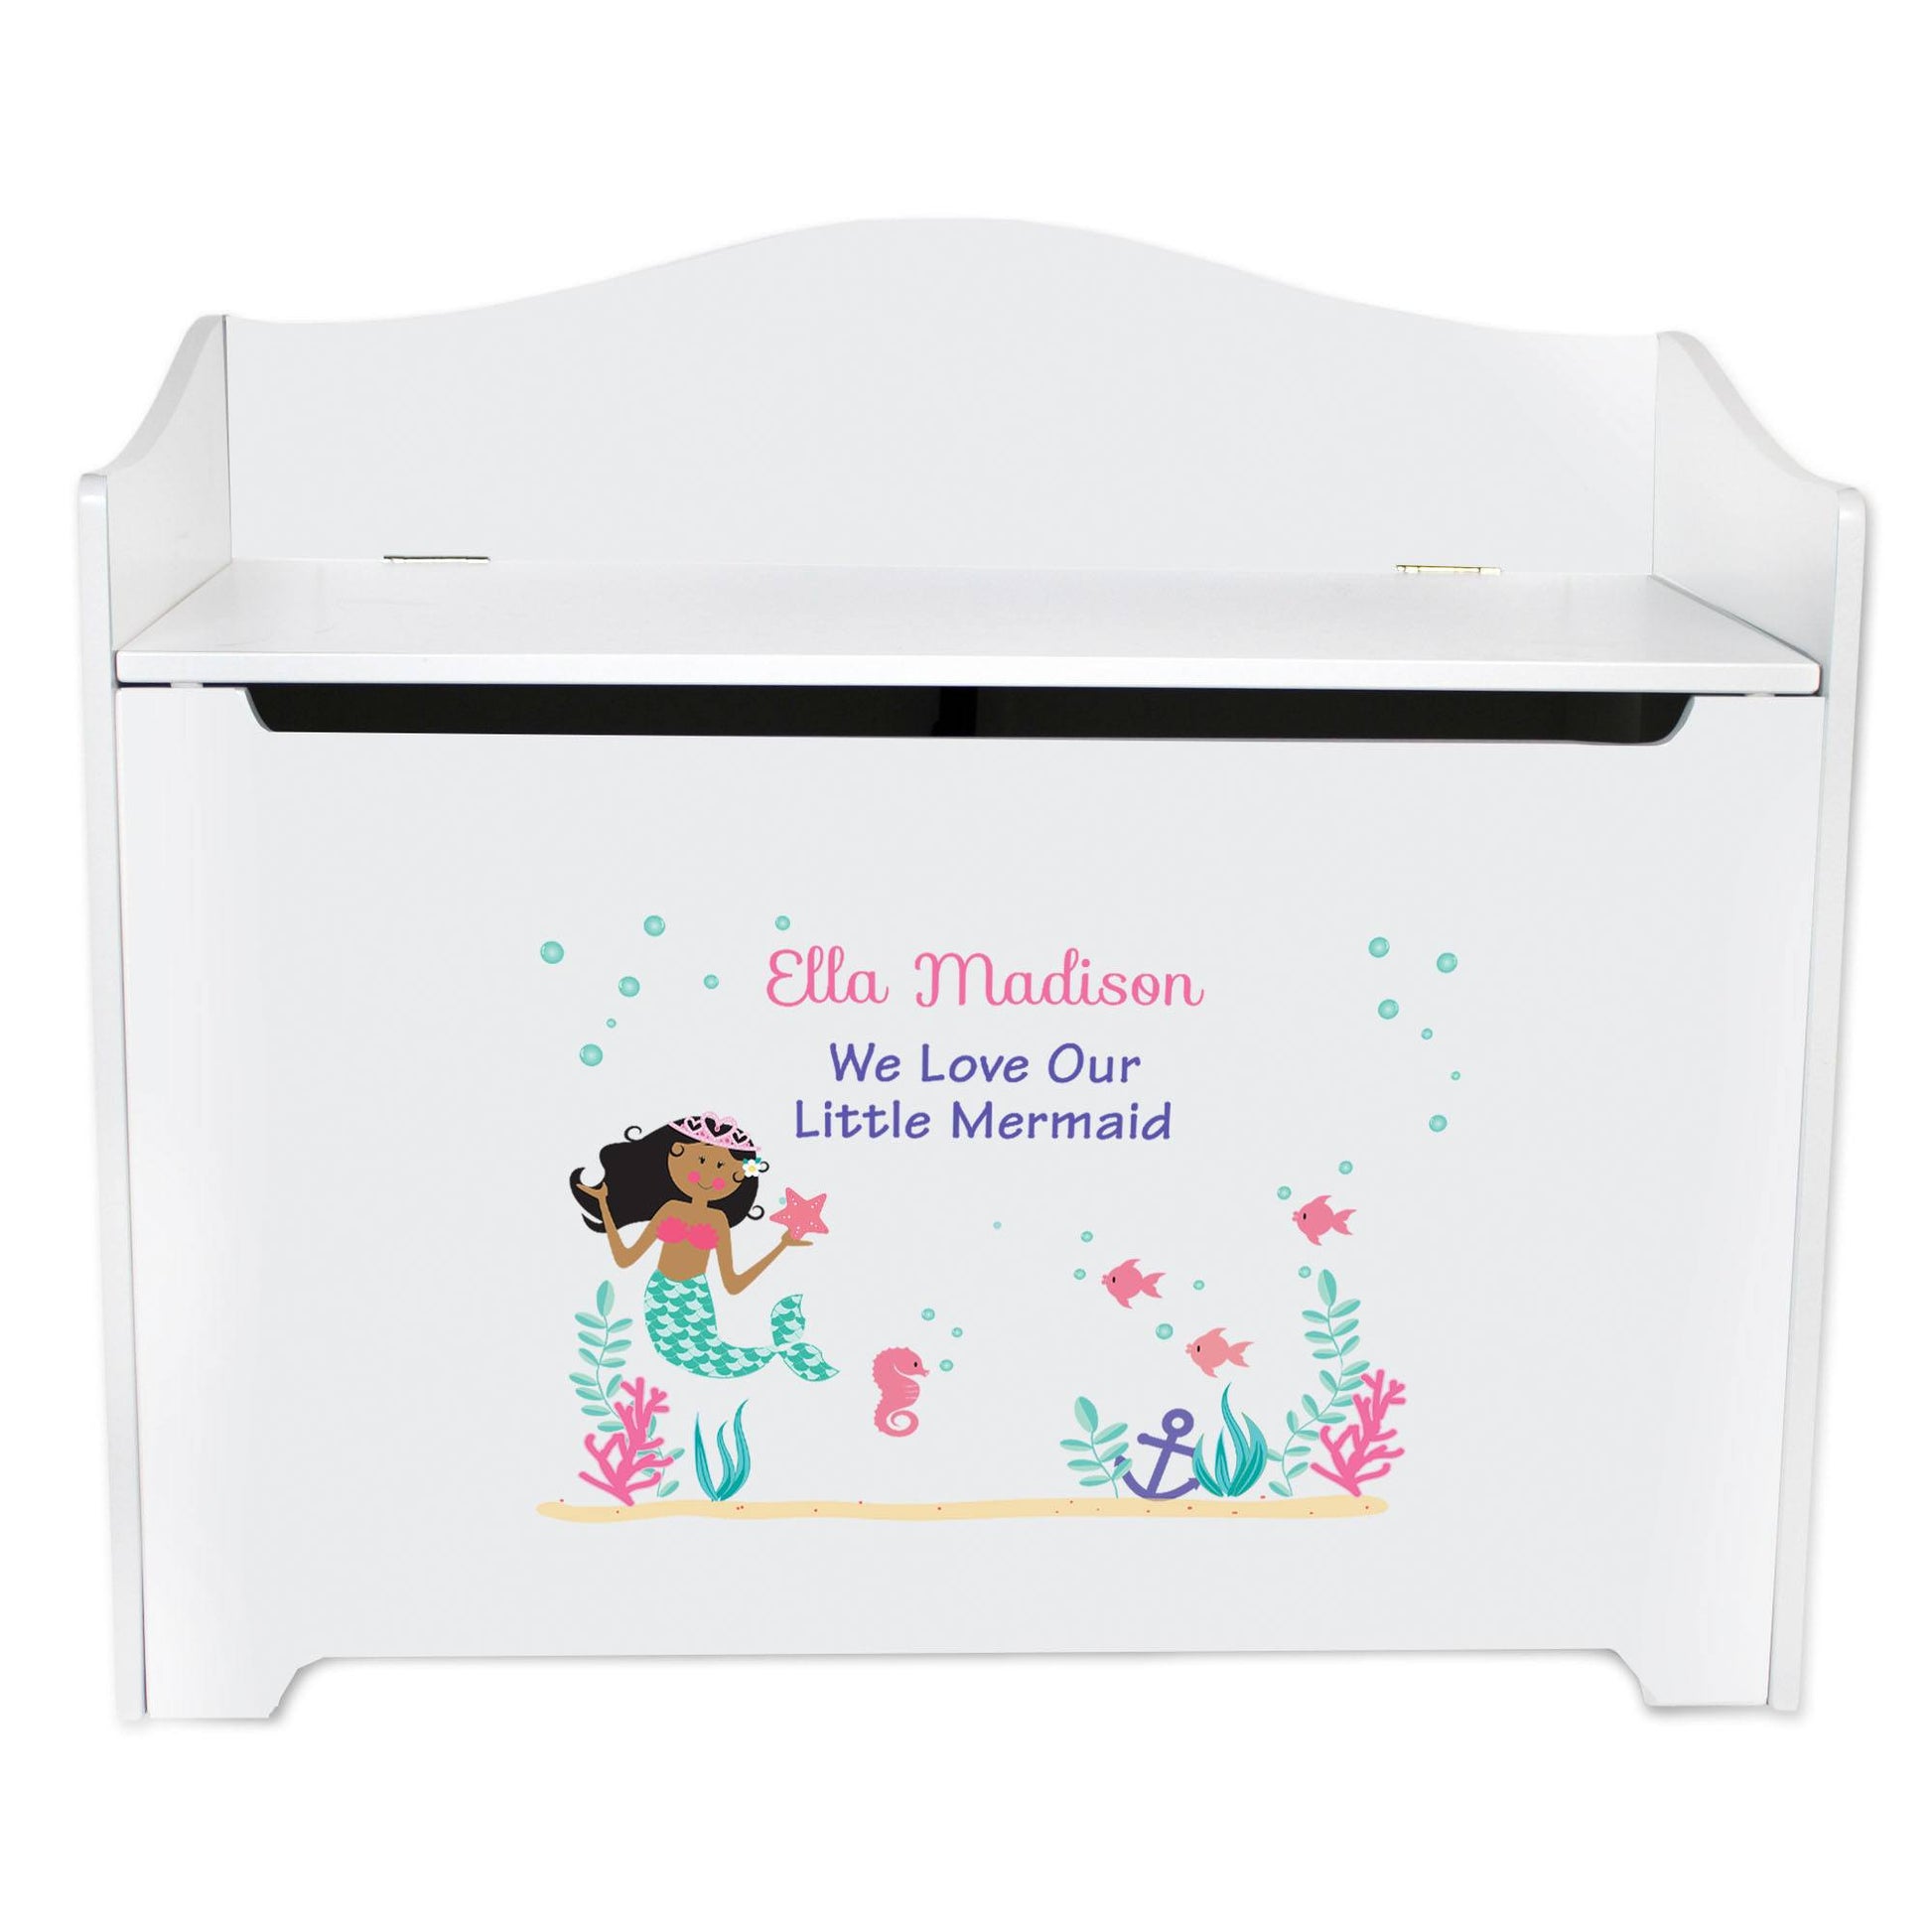 White Wooden Toy Box Bench with African American Mermaid Princess design